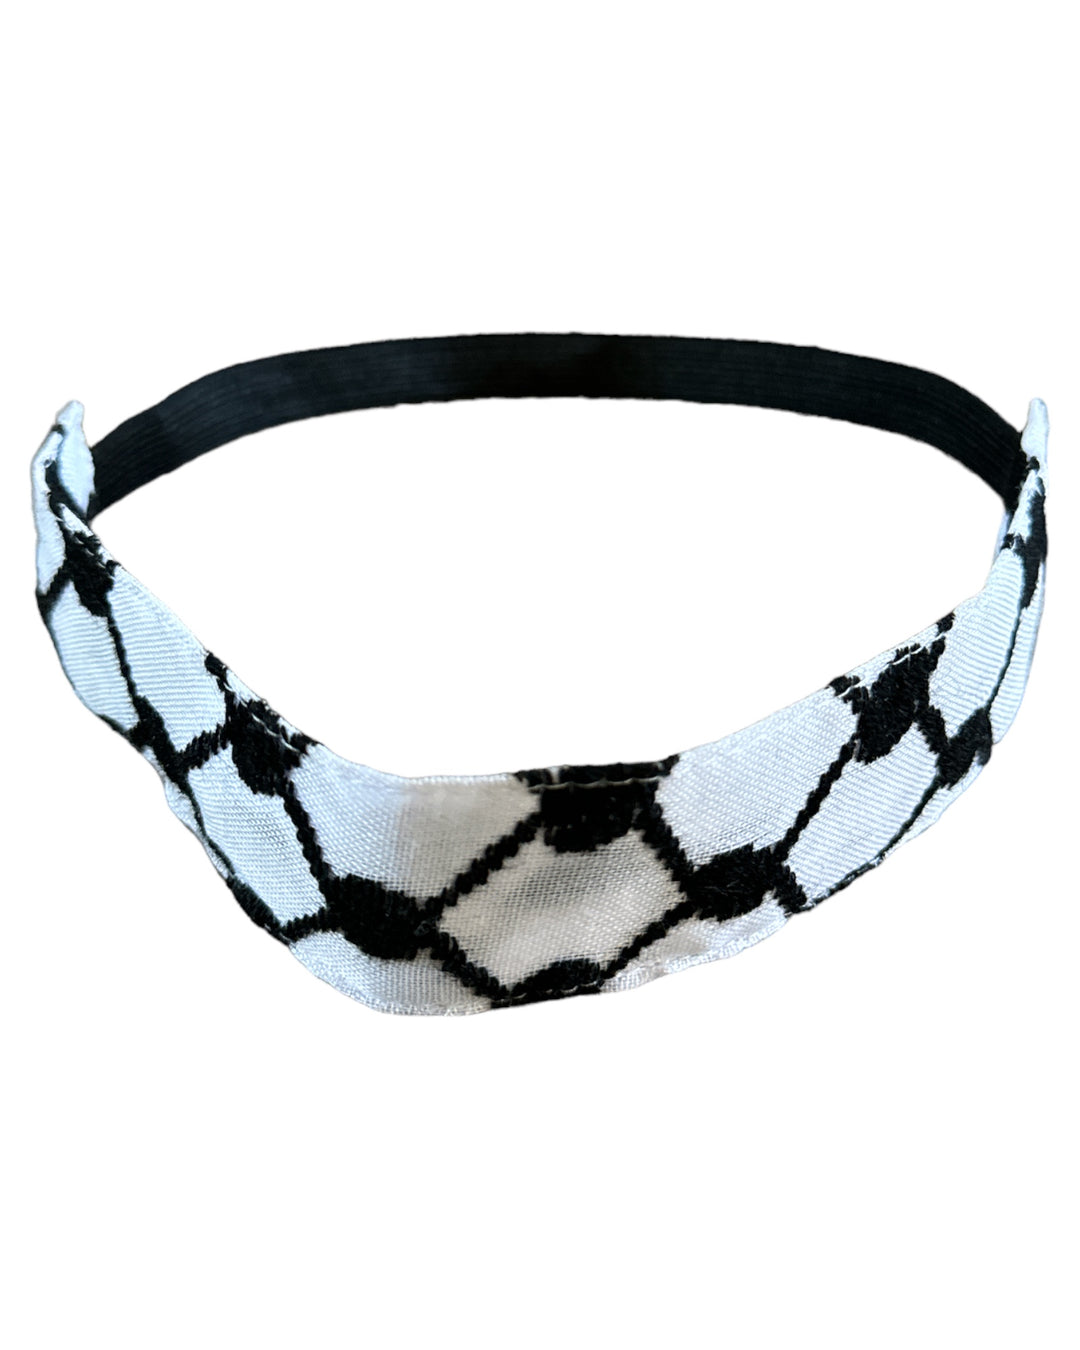 Exclusive Handcrafted Keffiyeh Headband: Universal Elegance for All Ages